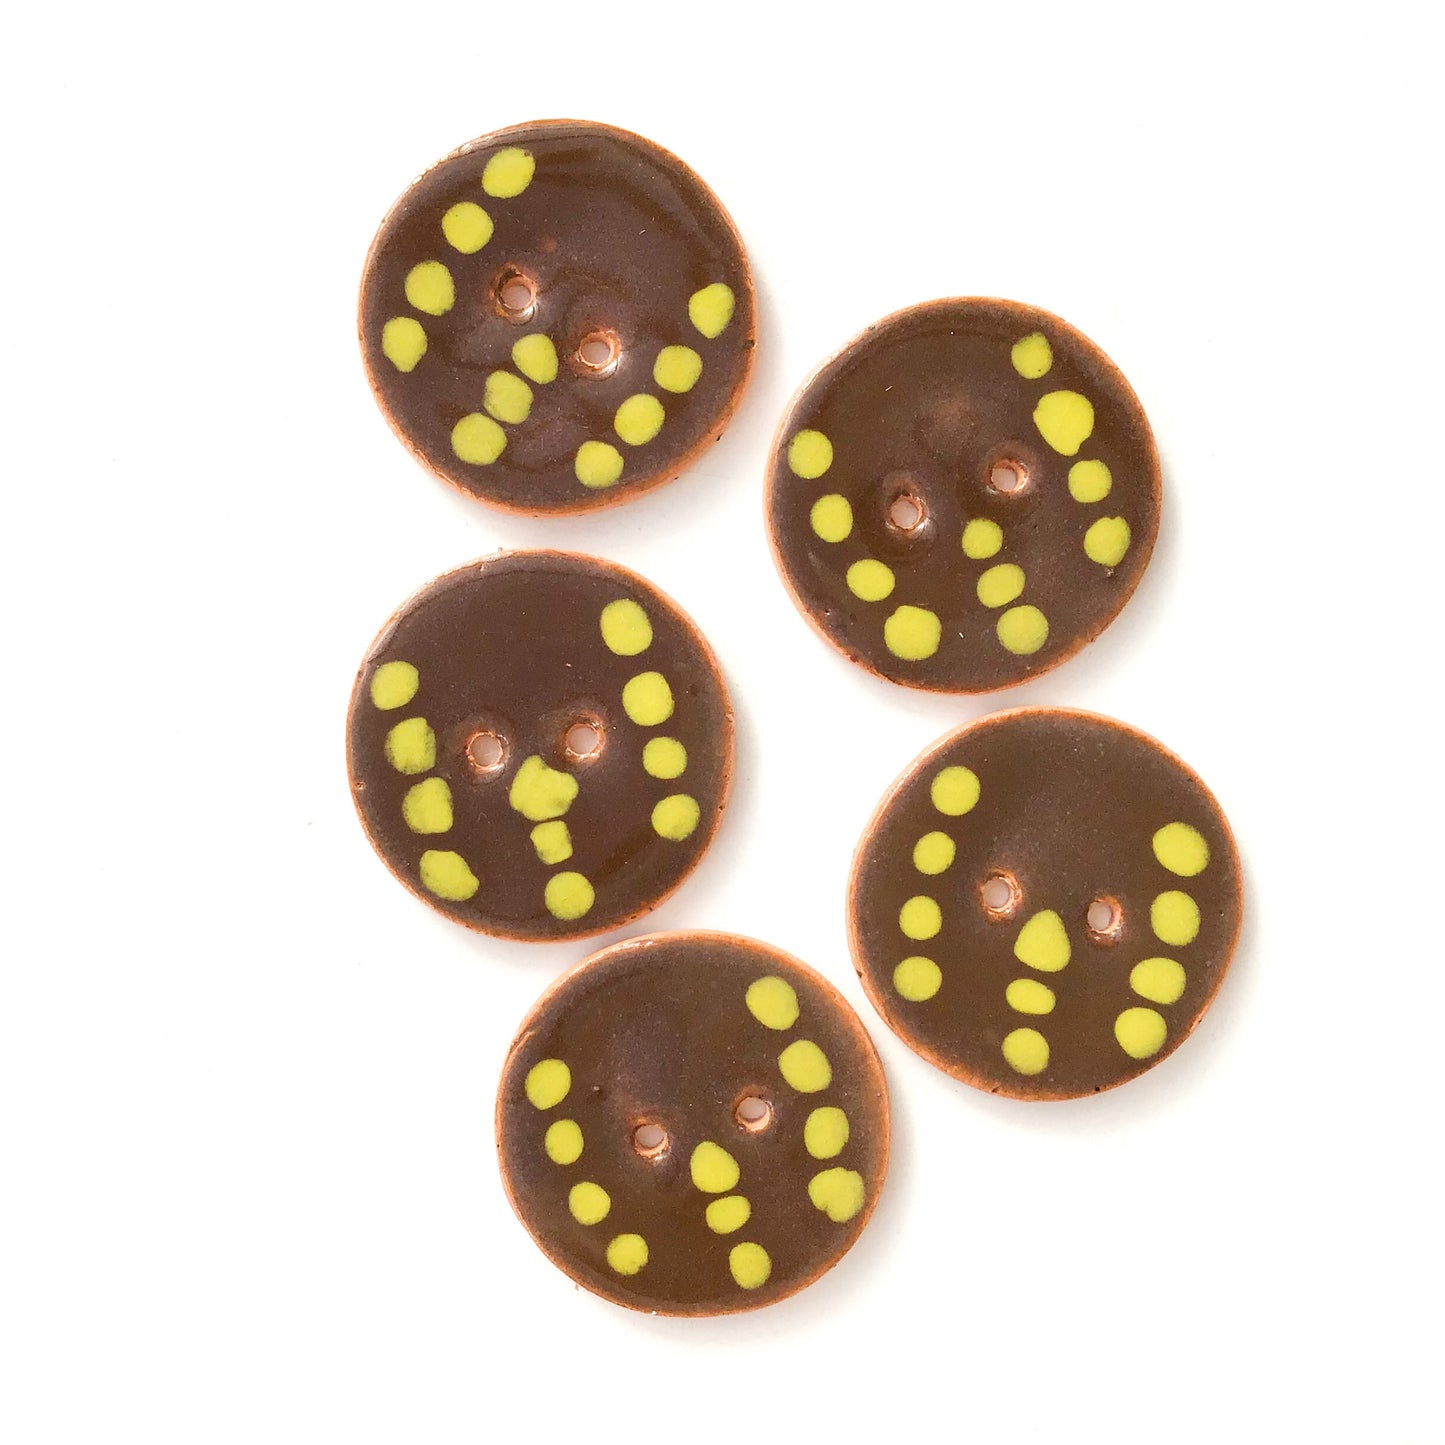 Brown & Chartreuse Dotted Ceramic Buttons 1-1/16" - 5 Pack